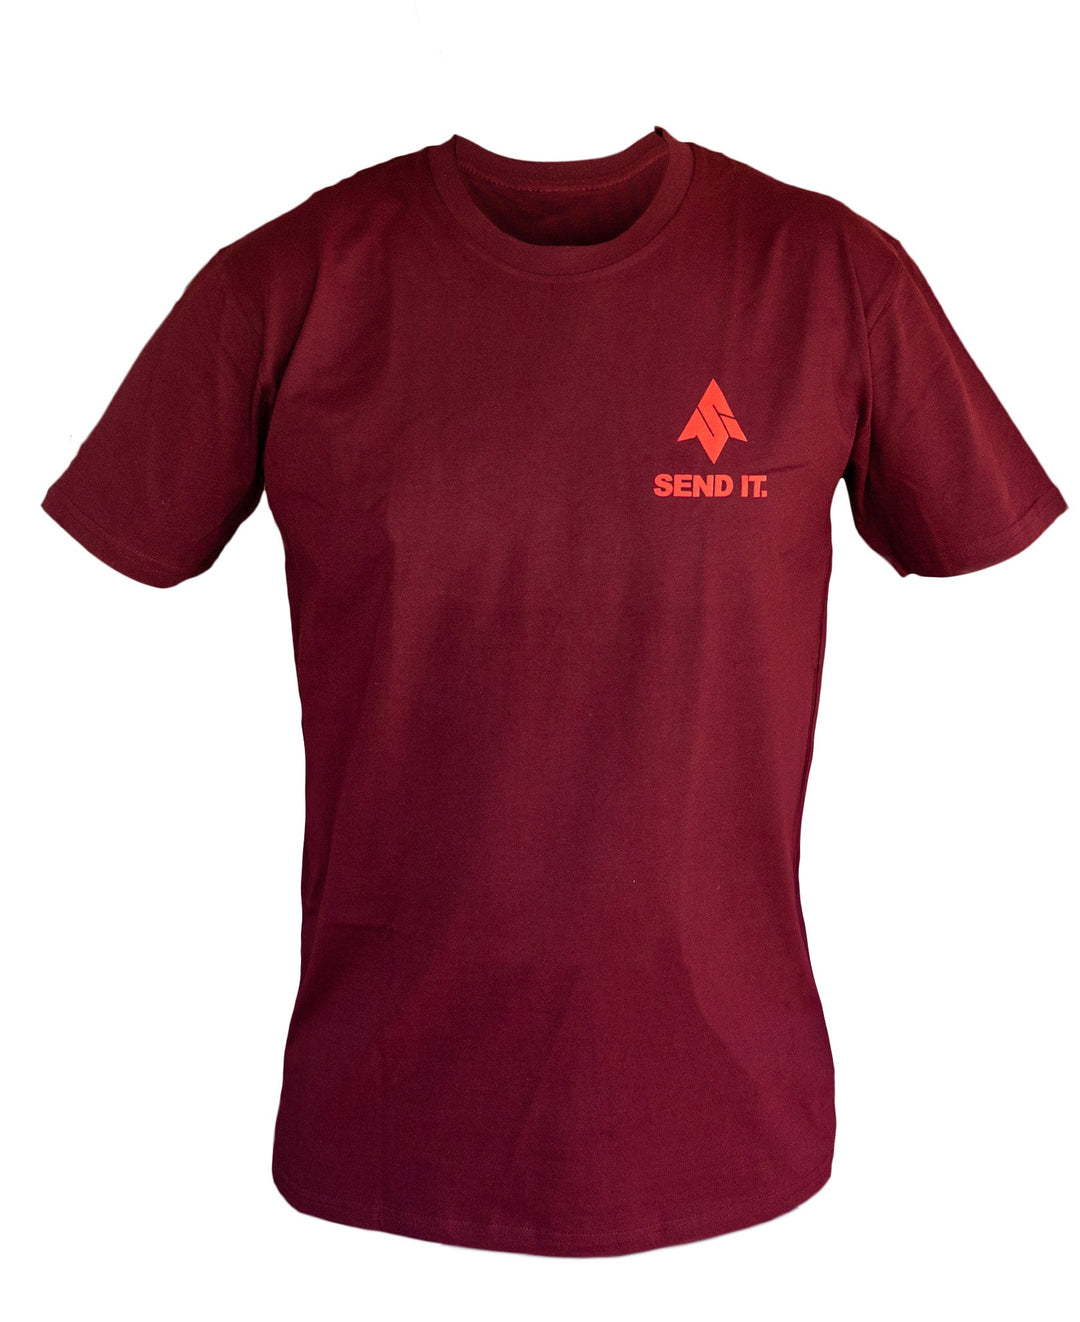 Image of the front of the mens Send It Inbound T-shirt featuring the send it iconic logo on the left of the chest in a fiery red printed on a cabernet colored shirt.